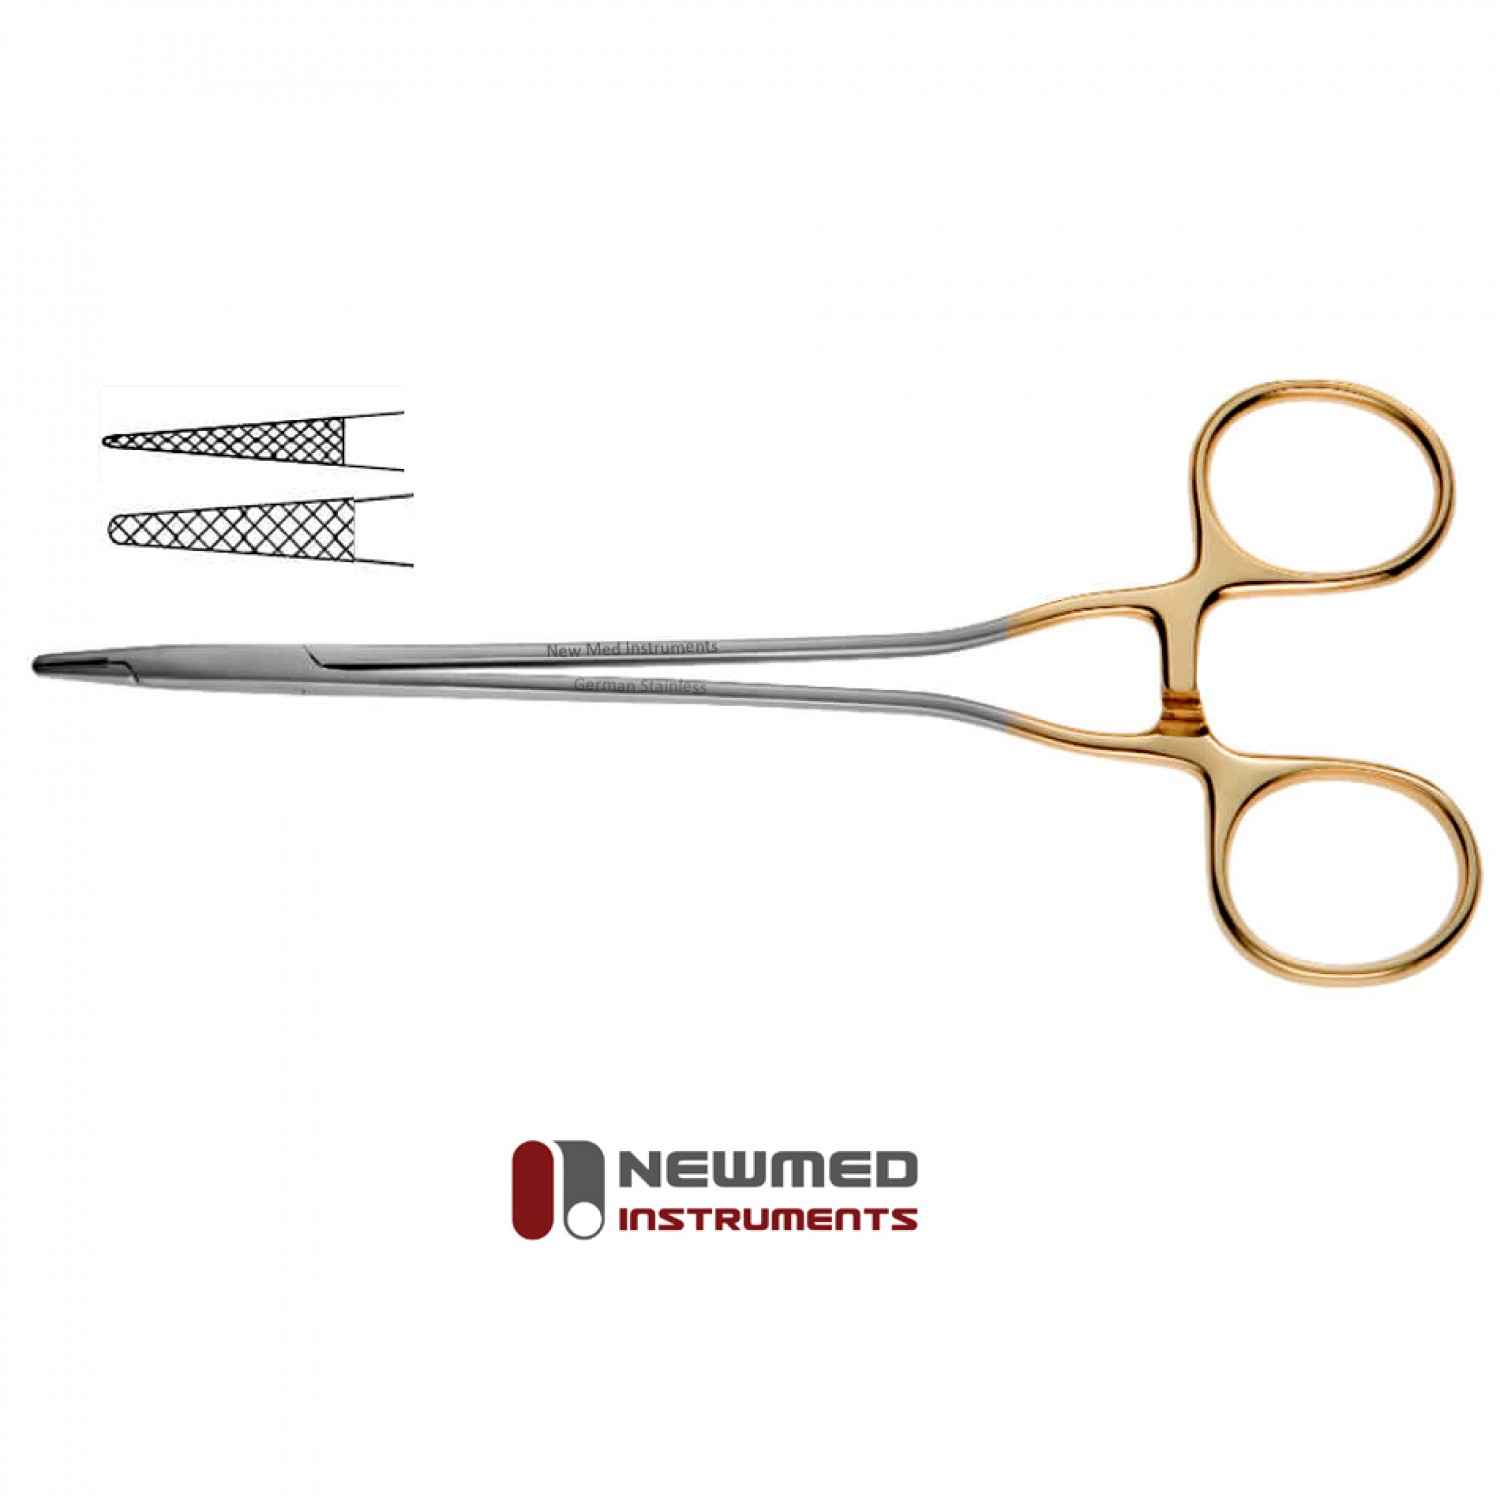 Tebbetts Delicate Needle Holder - Tungsten Carbide Serrated Jaw